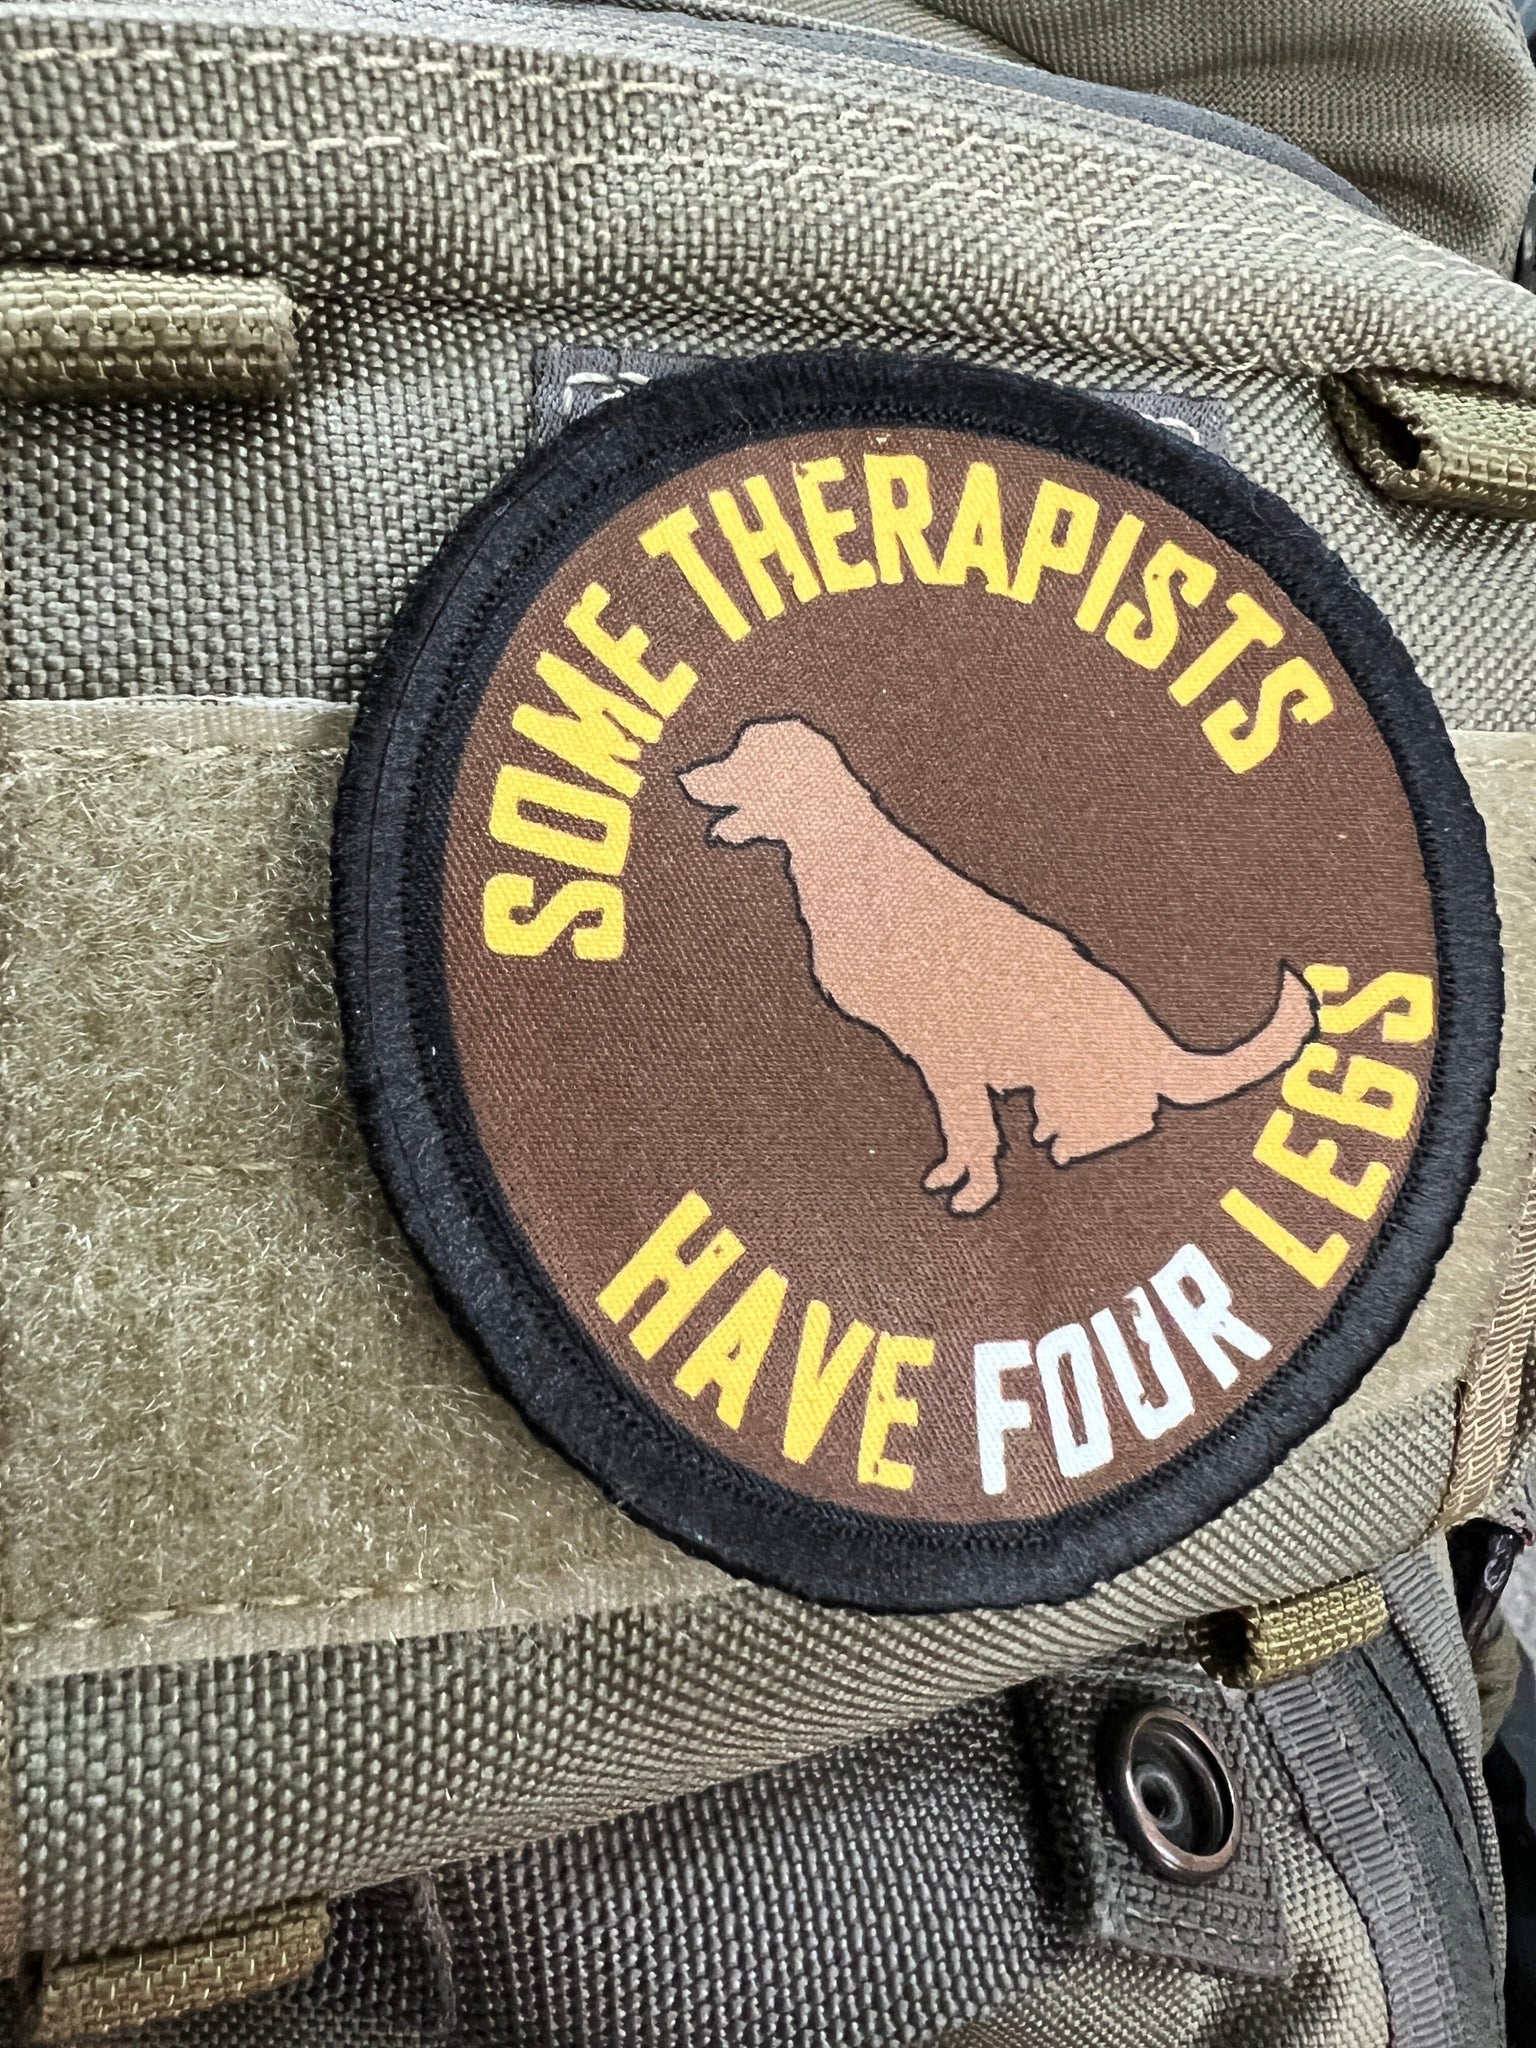 Some Therapists Have Four Legs Morale Patch Morale Patches Redheaded T Shirts 